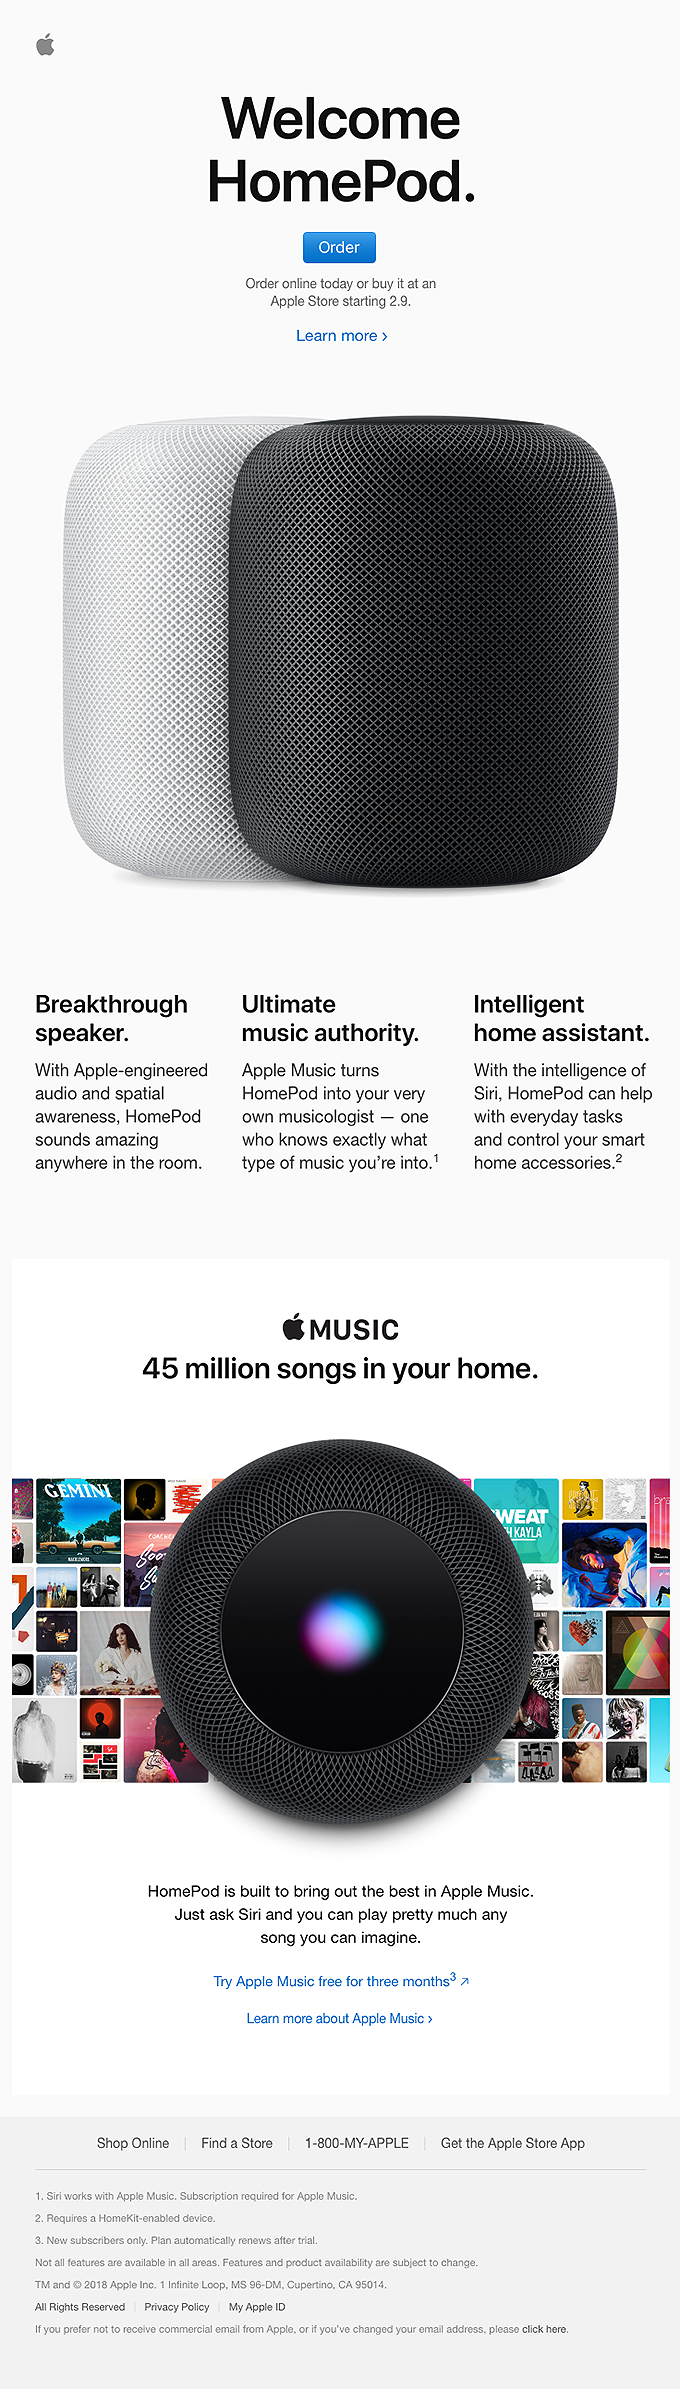 HomePod. The new sound of home.